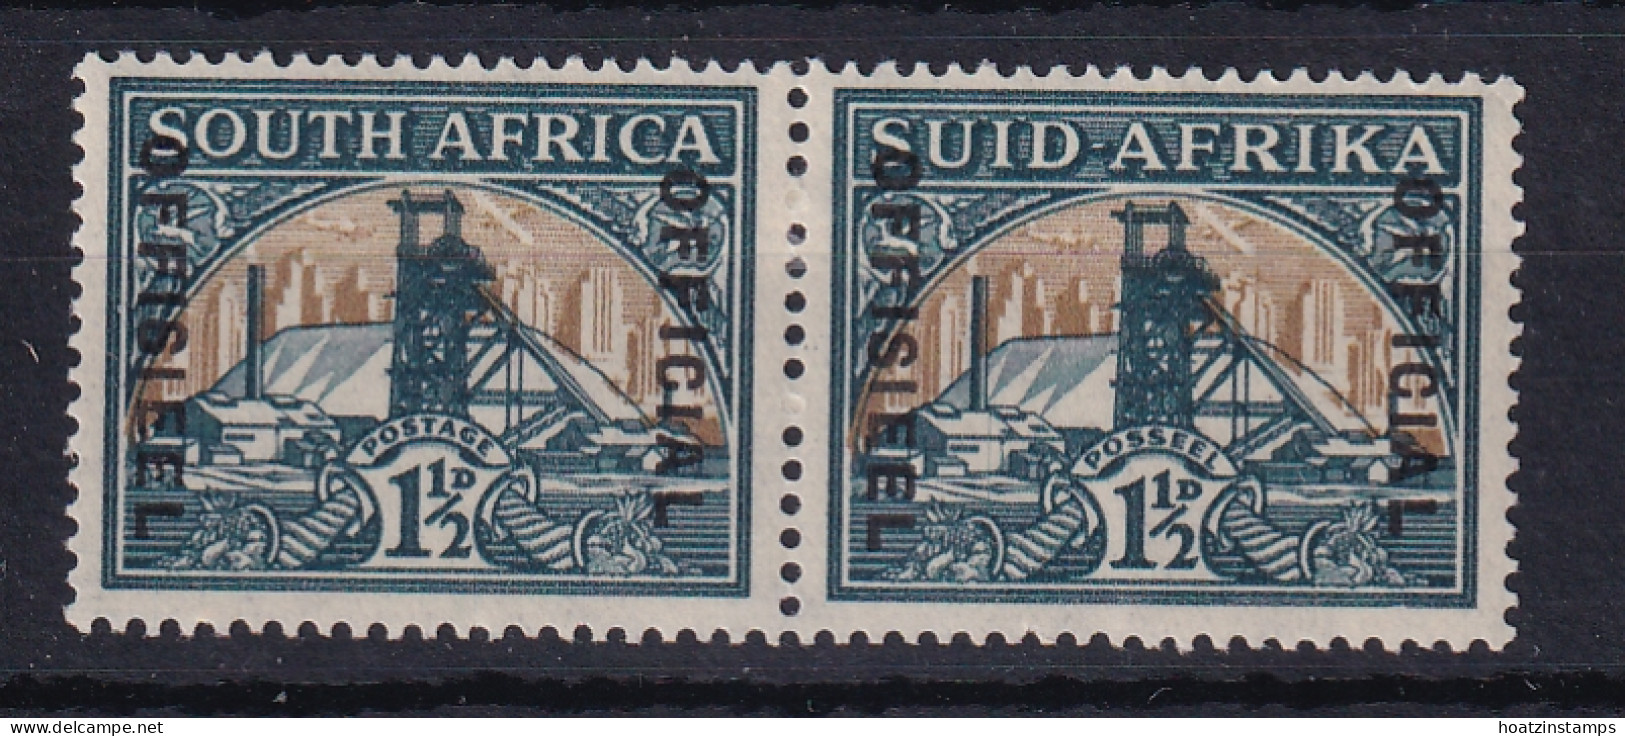 South Africa: 1935/49   Official - Goldmine   SG O22aw    1½d   Green & Bright Gold  [Wmk Upright]  MH Pair - Servizio